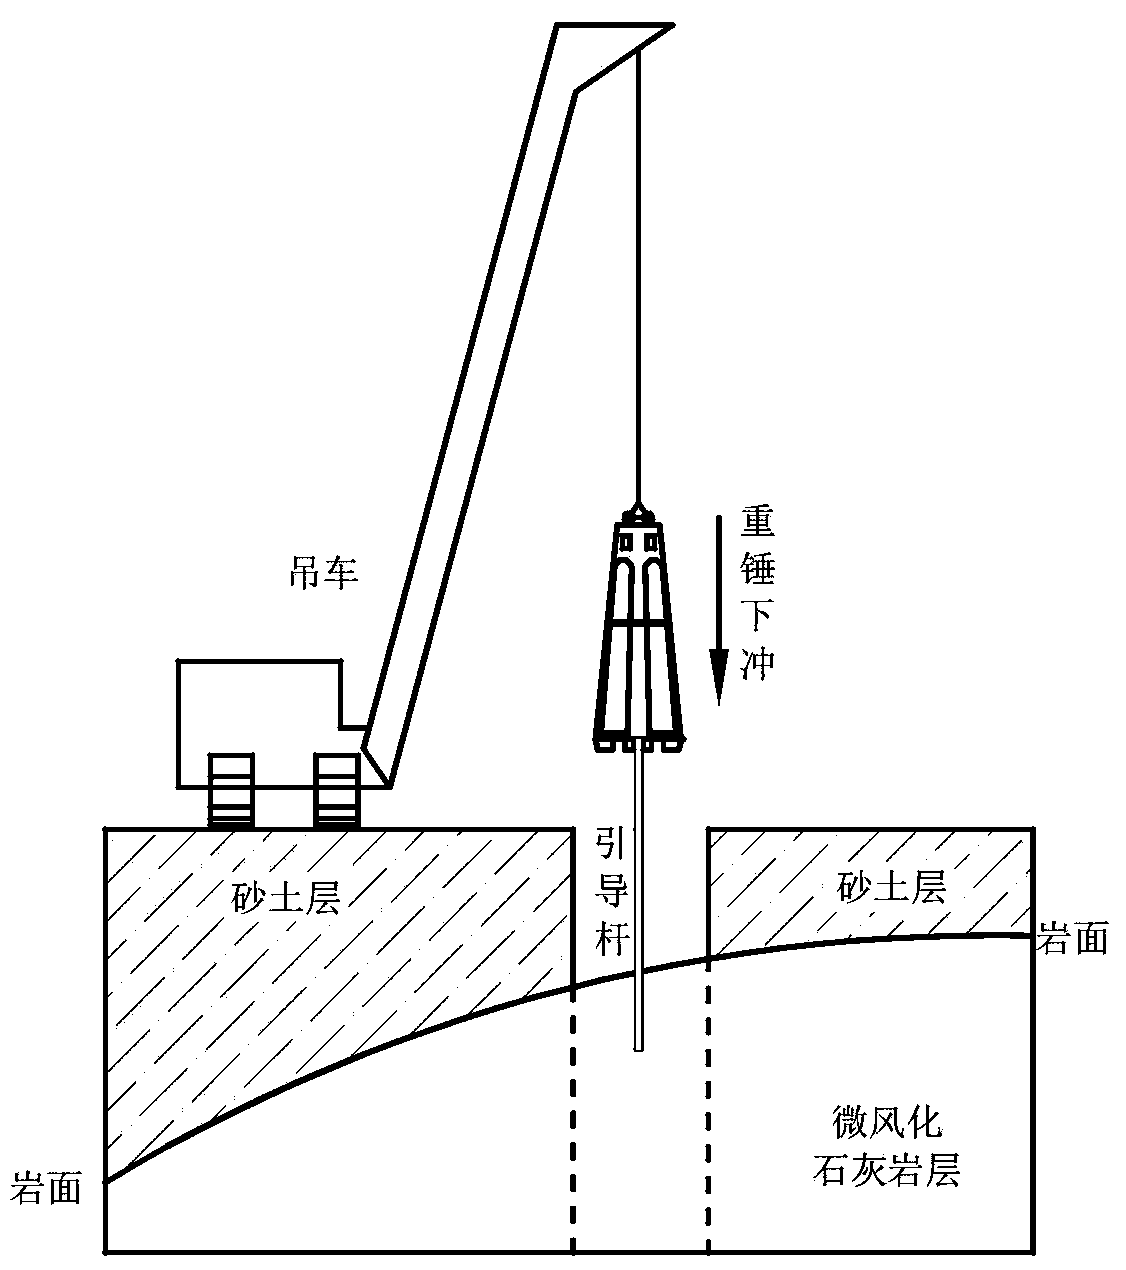 Effective grooving construction method for underground continuous wall in slightly-weathered limestone with overlying sandy soil